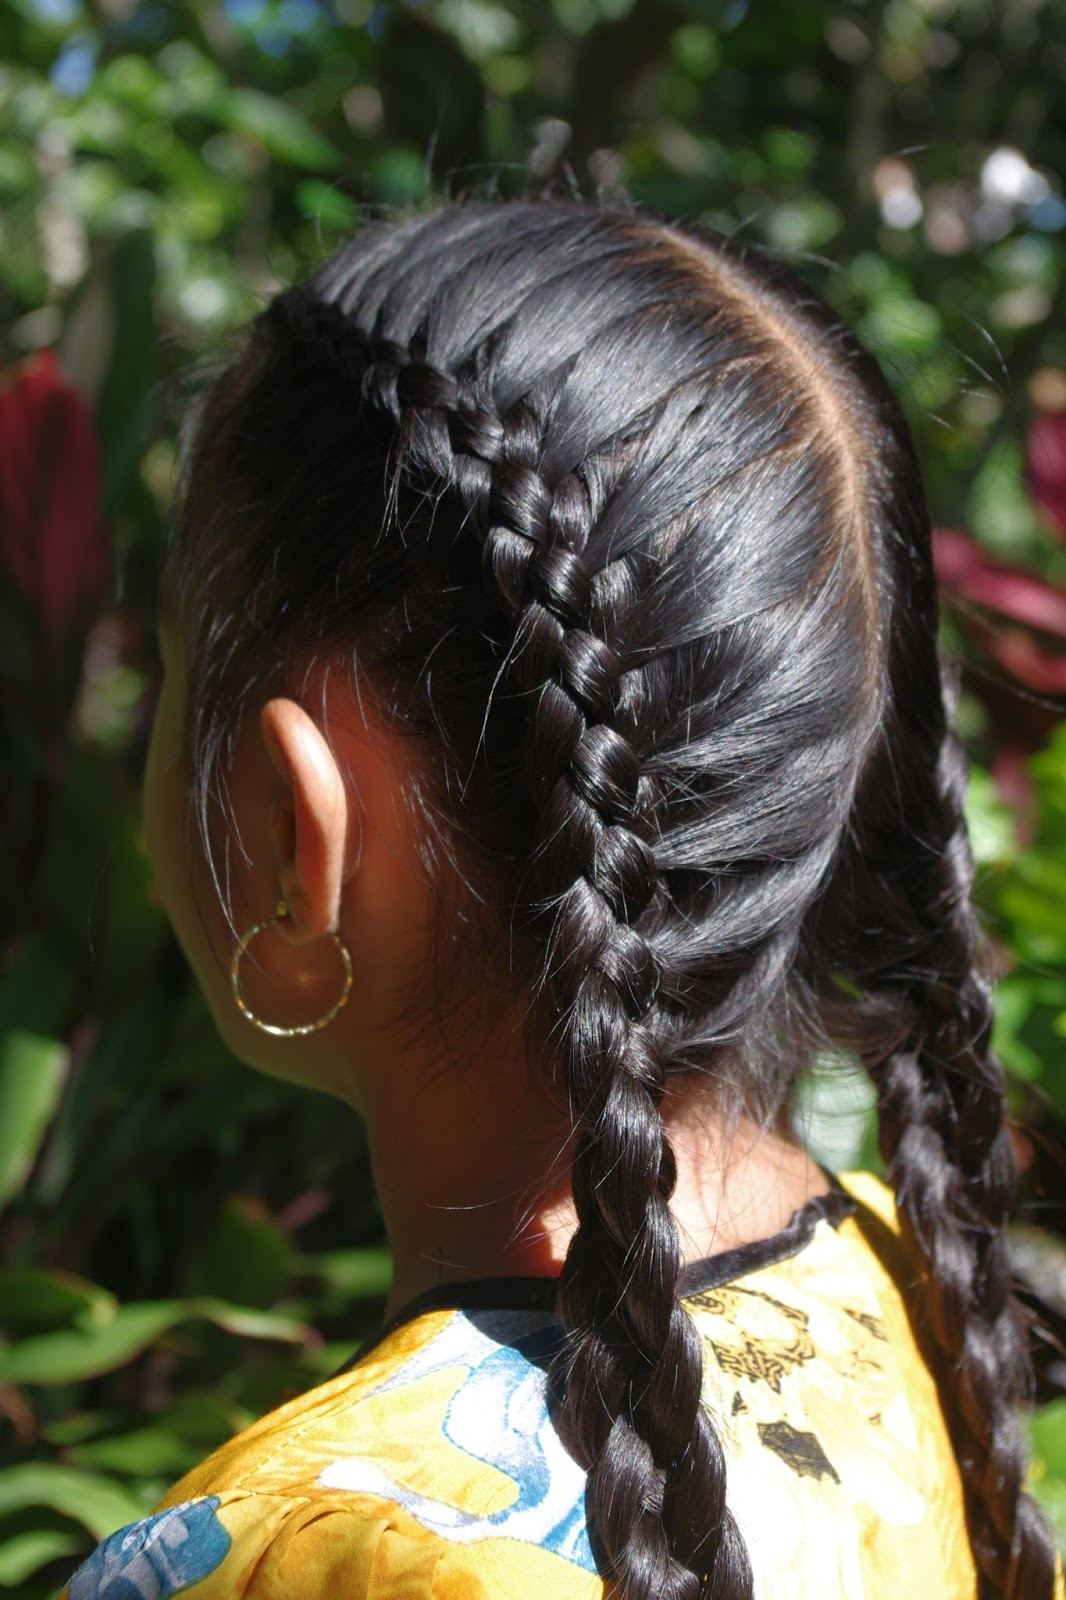 French Braid Hairstyles With Weave
 Braids & Hairstyles for Super Long Hair Micronesian Girl